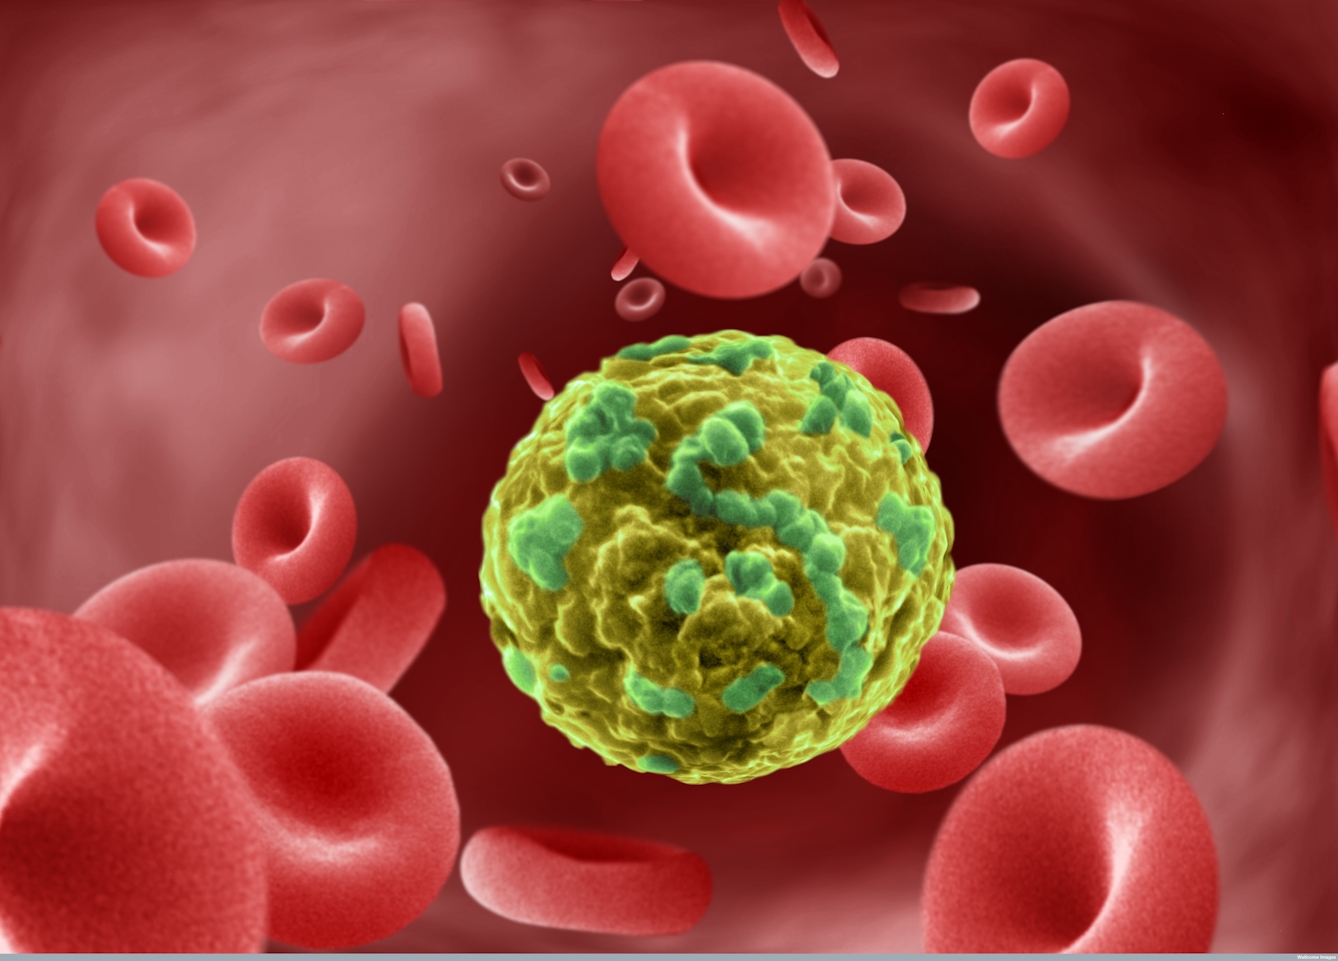 A yellow cancer cell floats against a background of red blood cells.